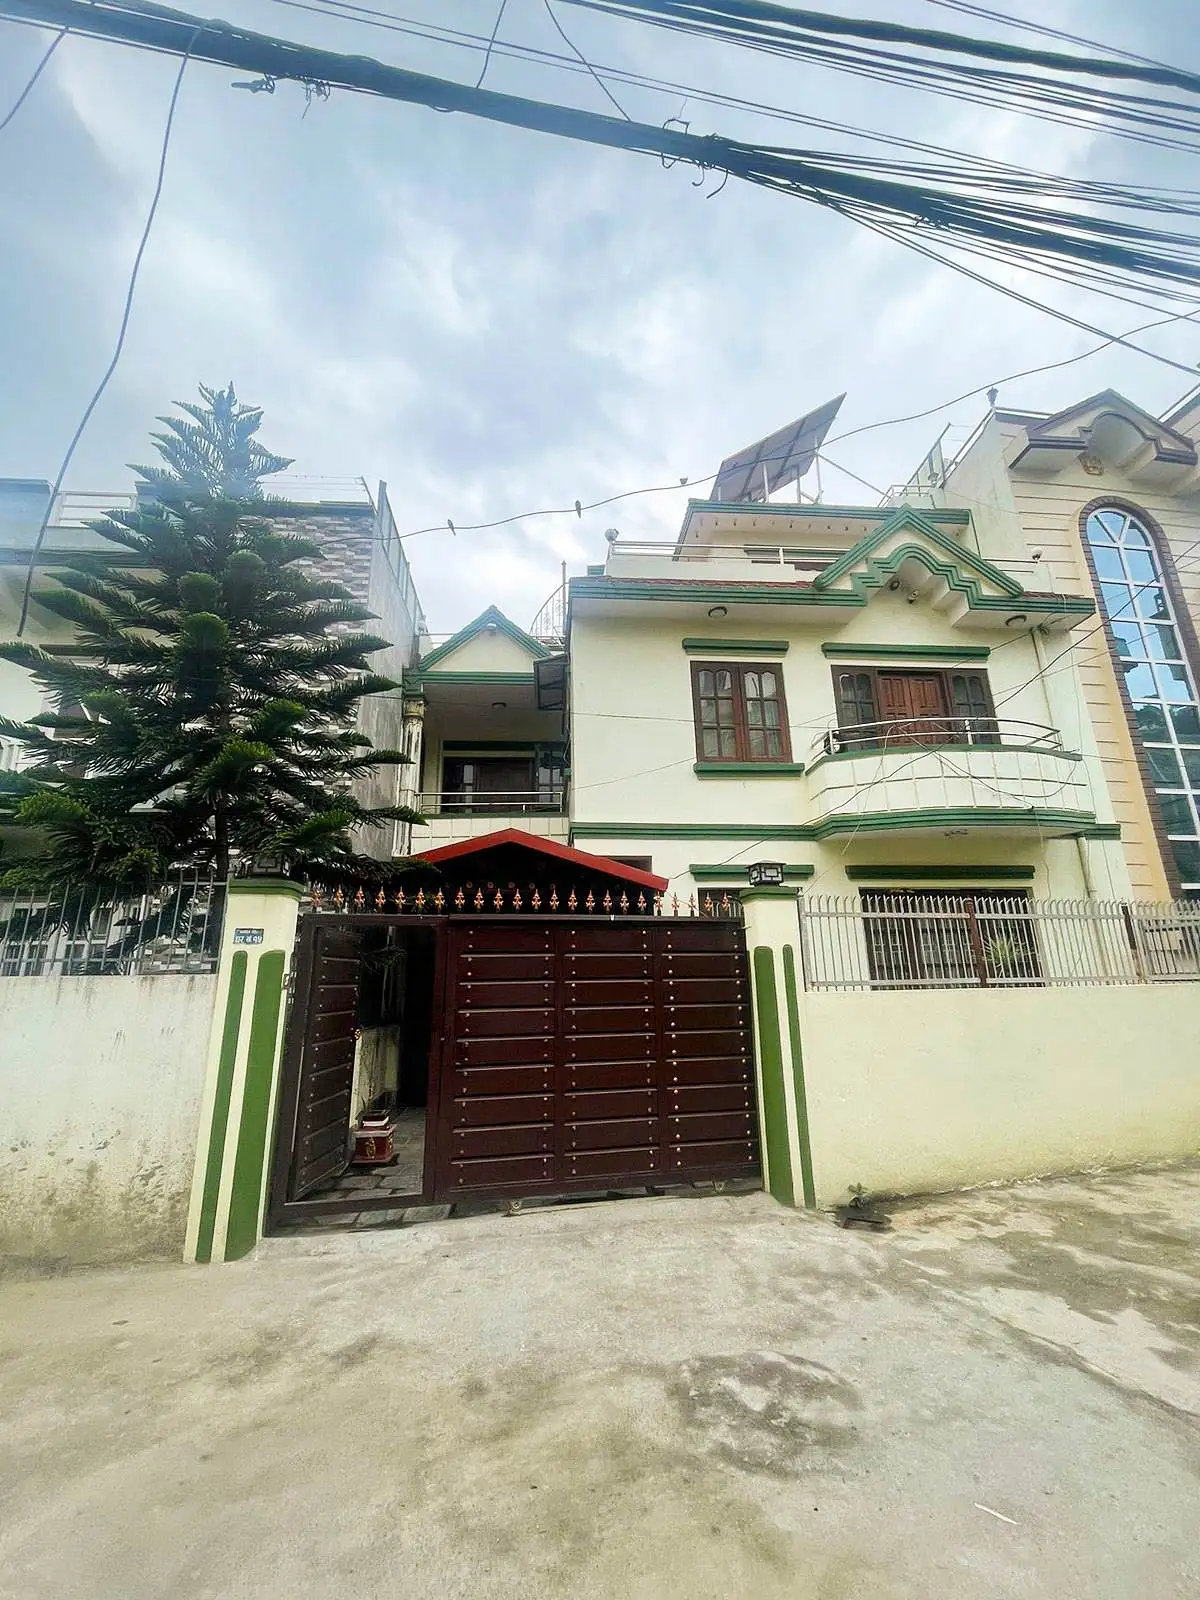 Bungalow house for sale in Balaju height Image 1